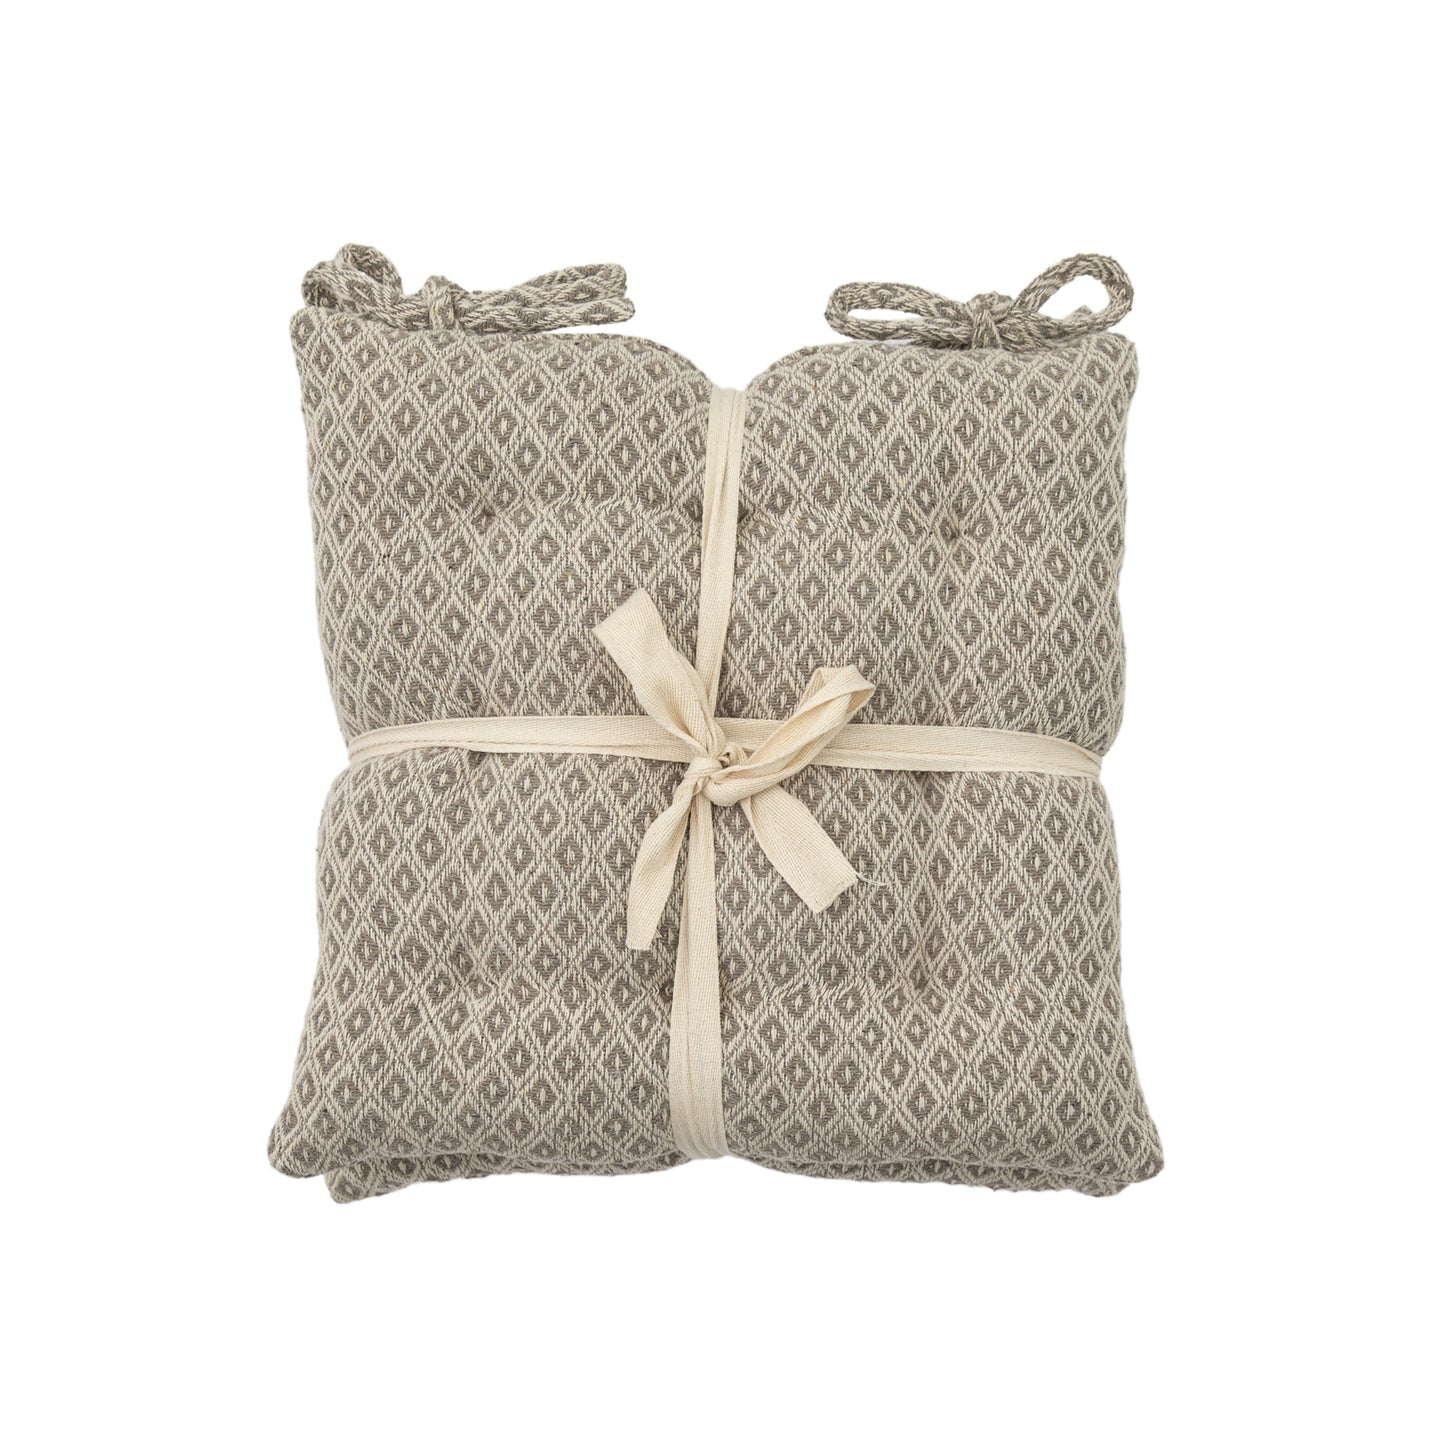 A pair of SG Recy Cott Geo Seatpad Taupe 430x430mm (2pk) pillows with a ribbon tied around them, perfect for interior decor.